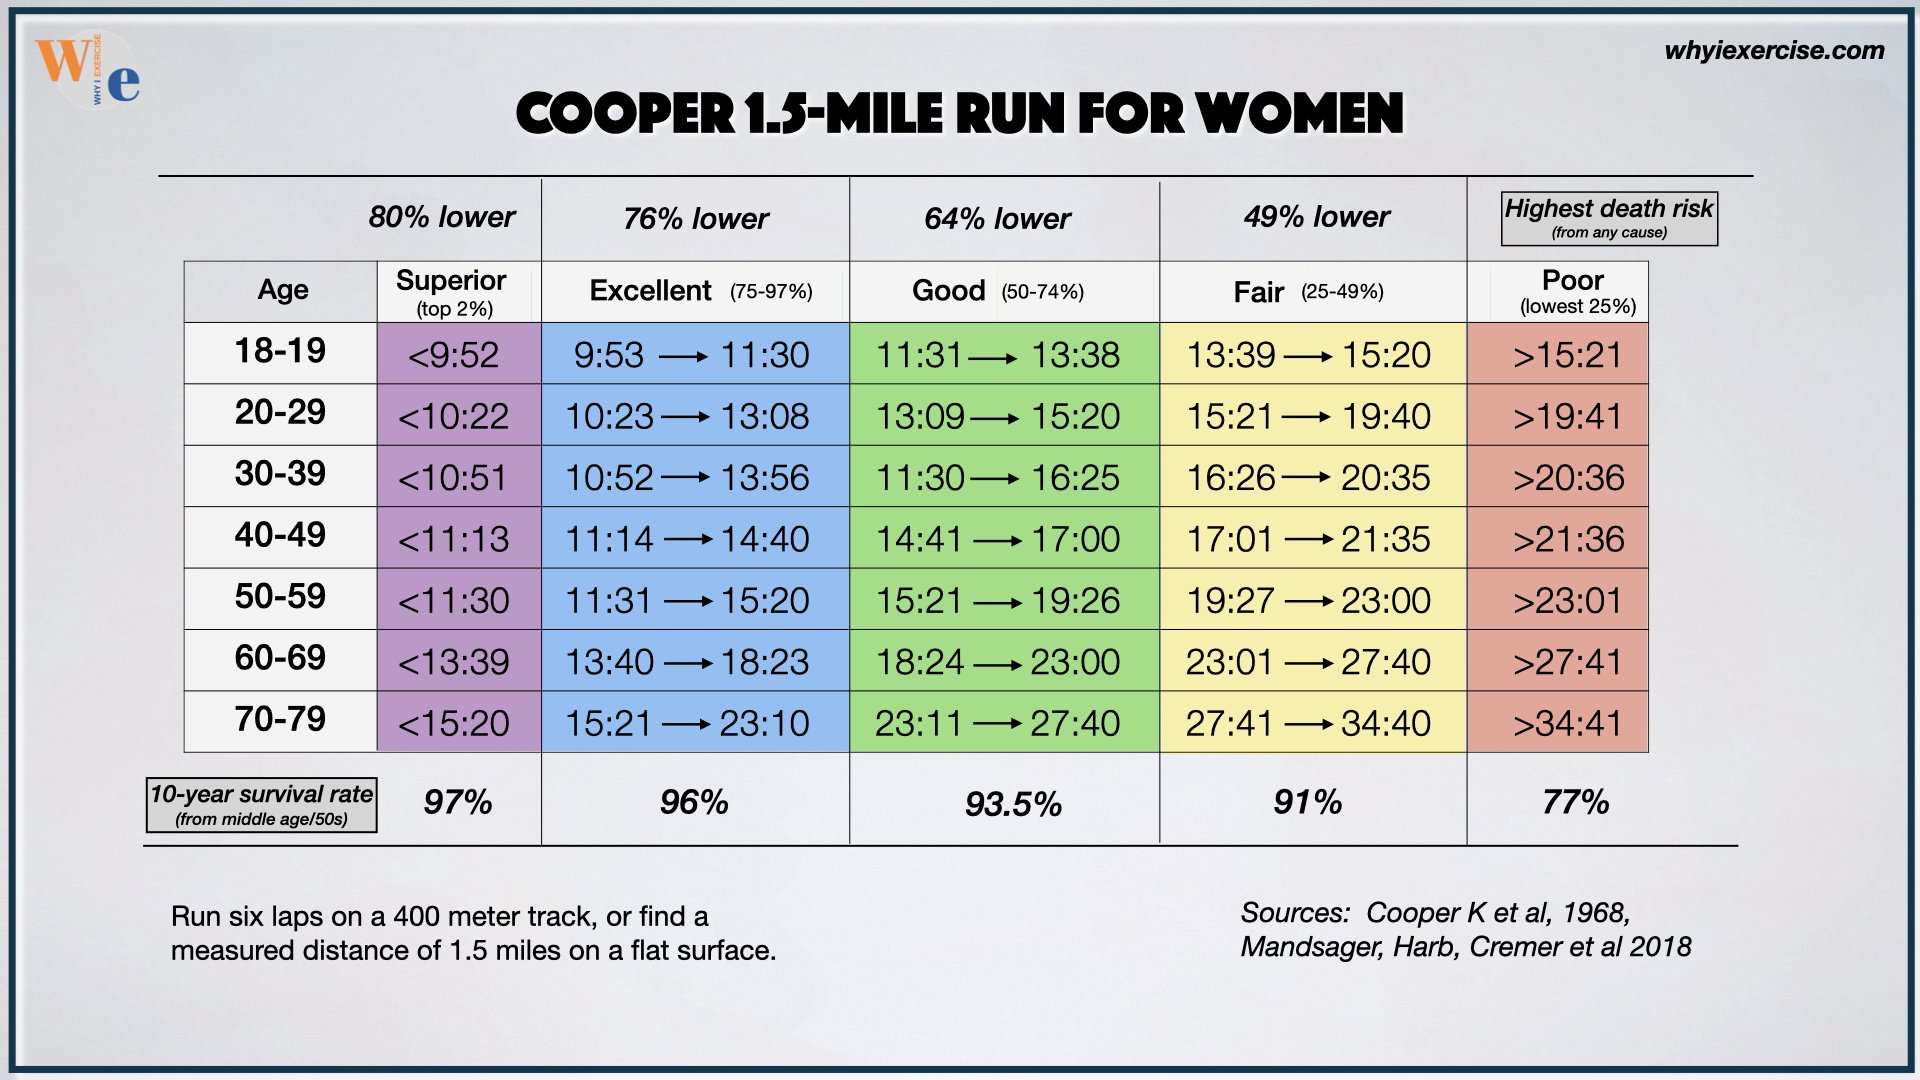 Cooper 1.5-mile run score chart for women by age group